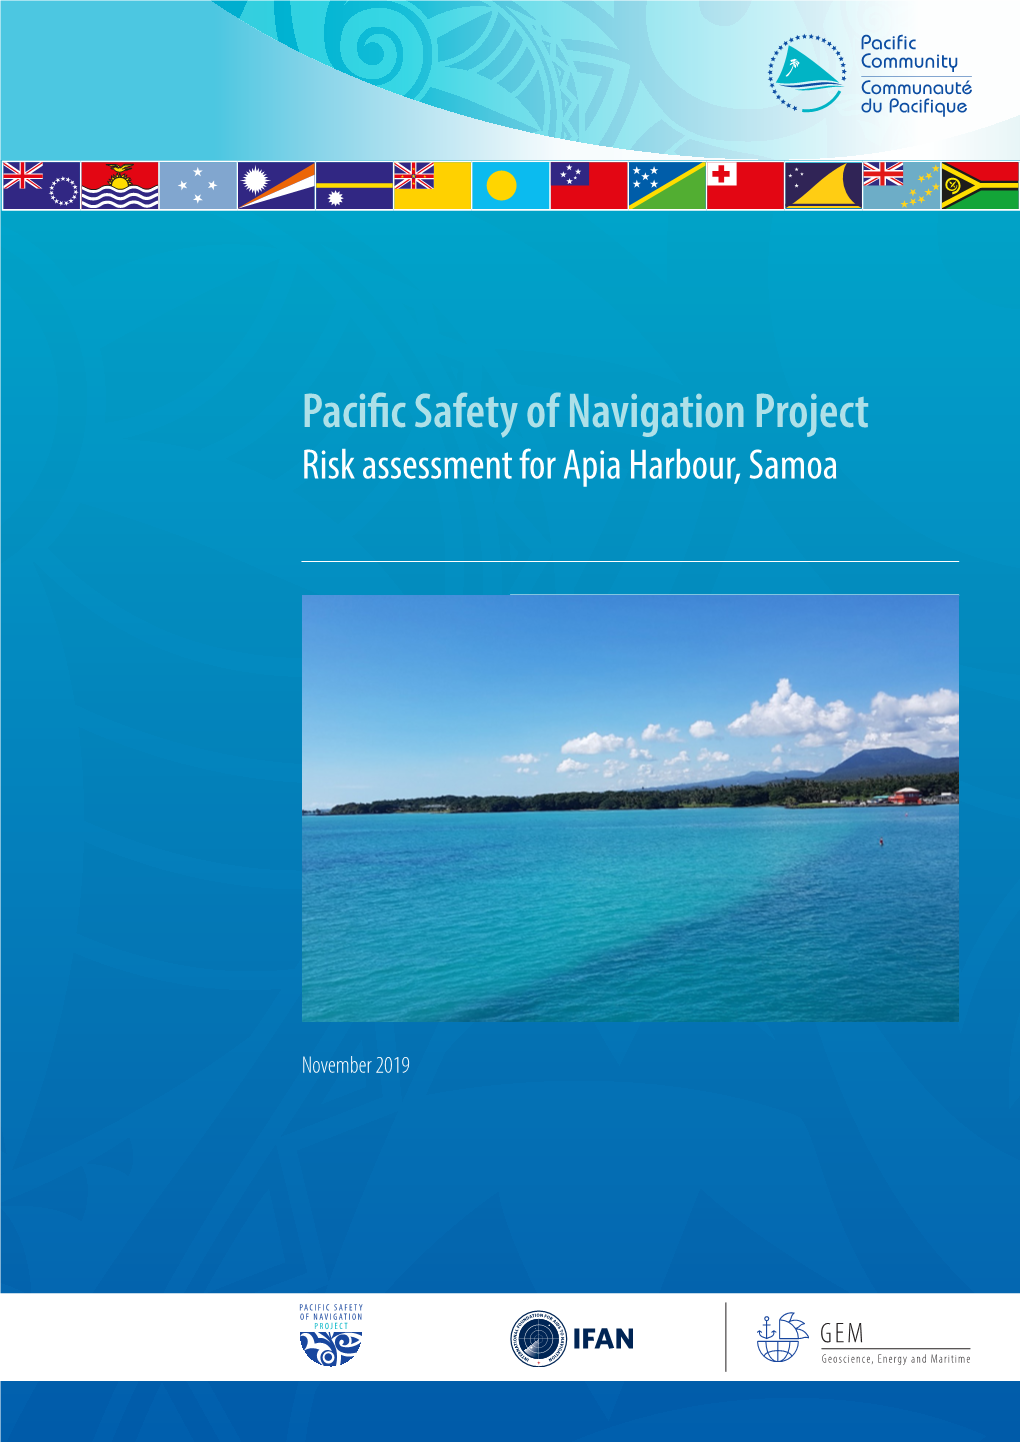 Pacific Safety of Navigation Project Risk Assessment for Apia Harbour, Samoa